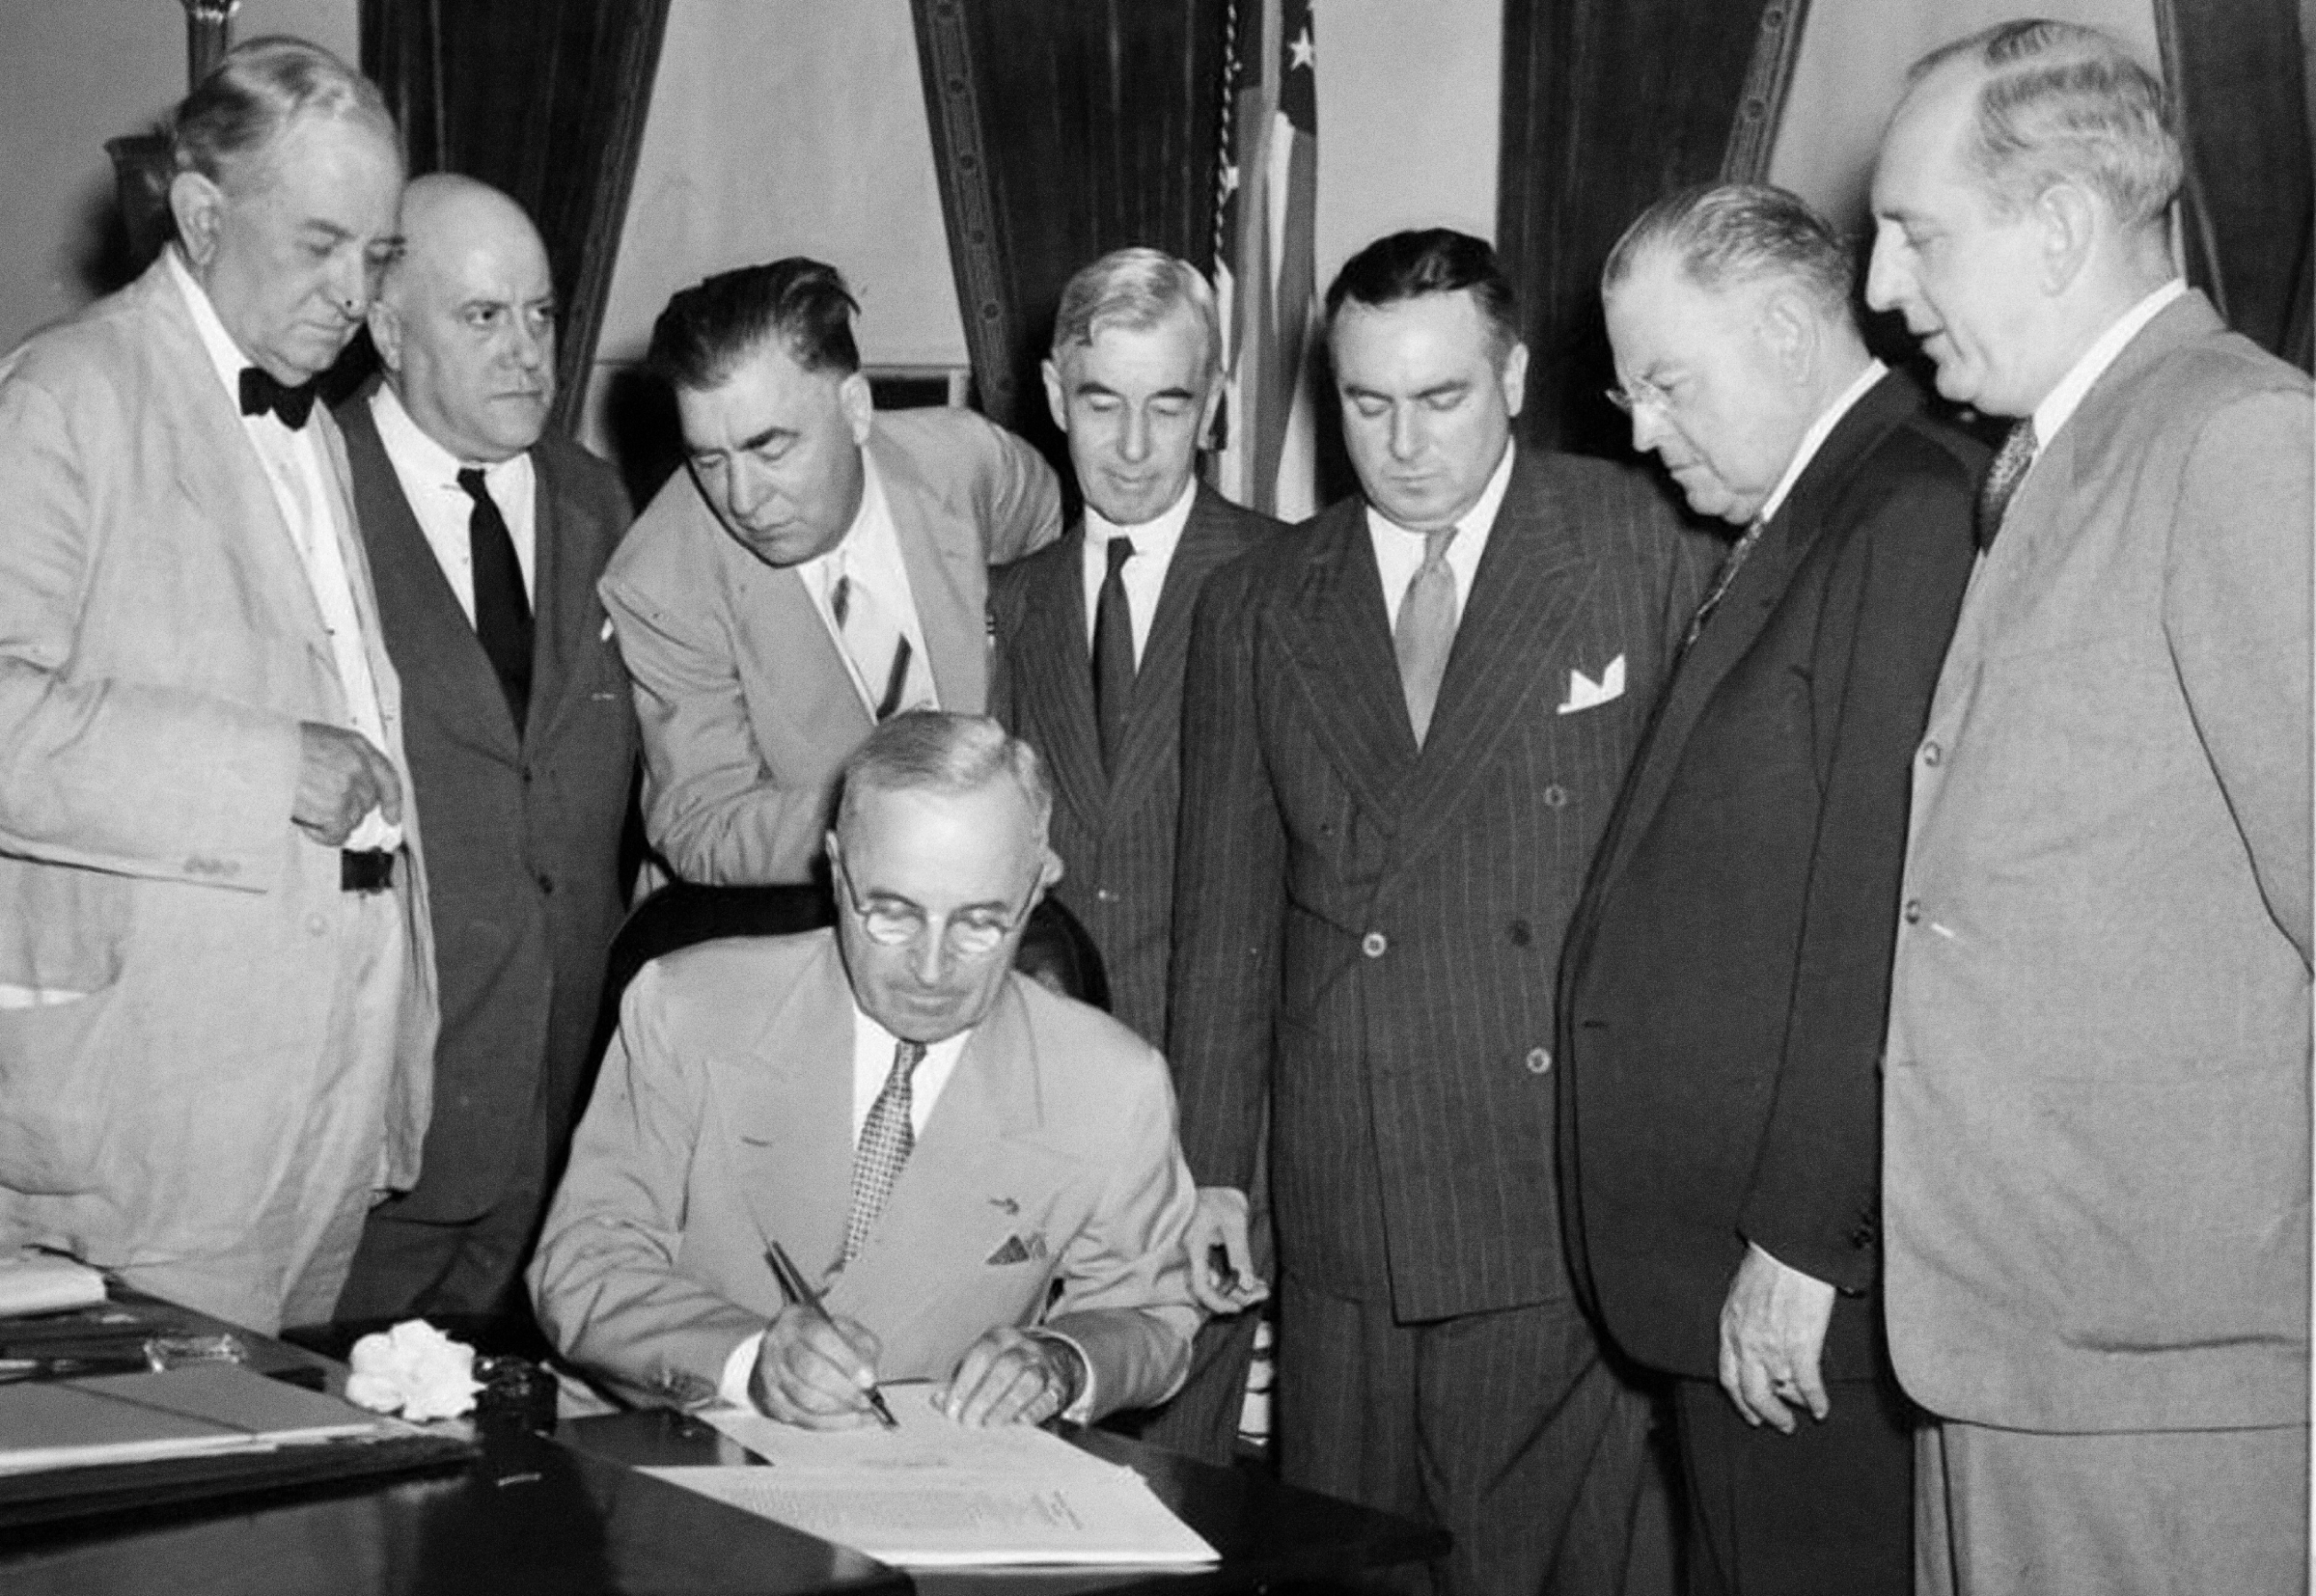 President Harry Truman signs the Atomic Energy Act of 1946 on August 1, 1946. Photo courtesy of the U.S. Department of Energy, flickr.com.